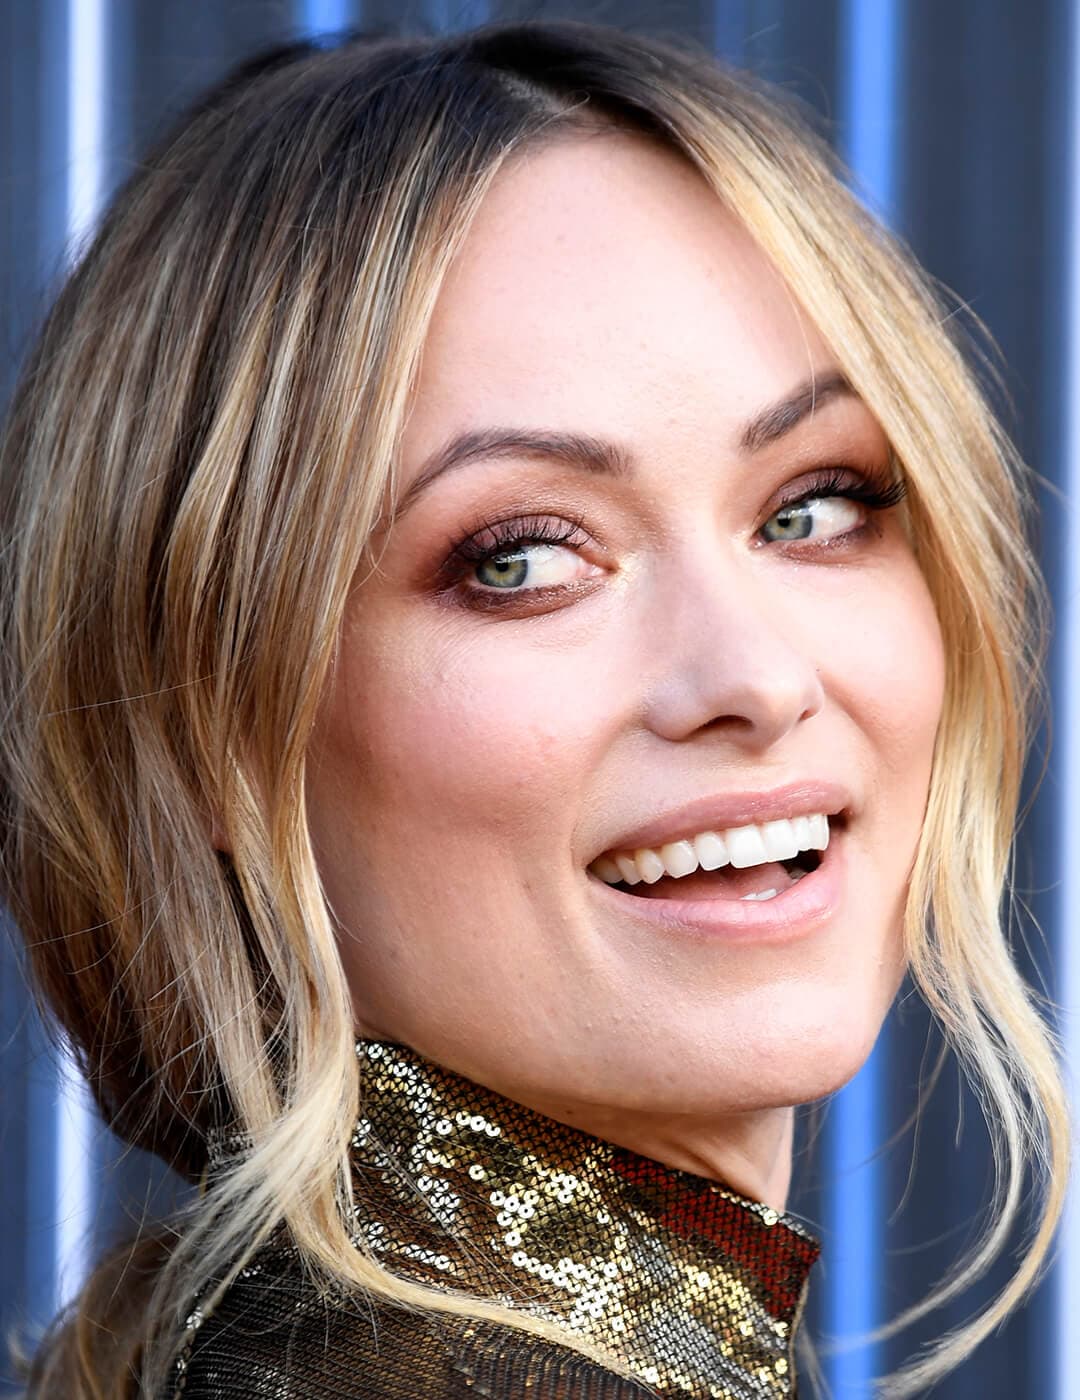 A closeup photo of Olivia Wilde with blonde hair wearing a gold sequin dress